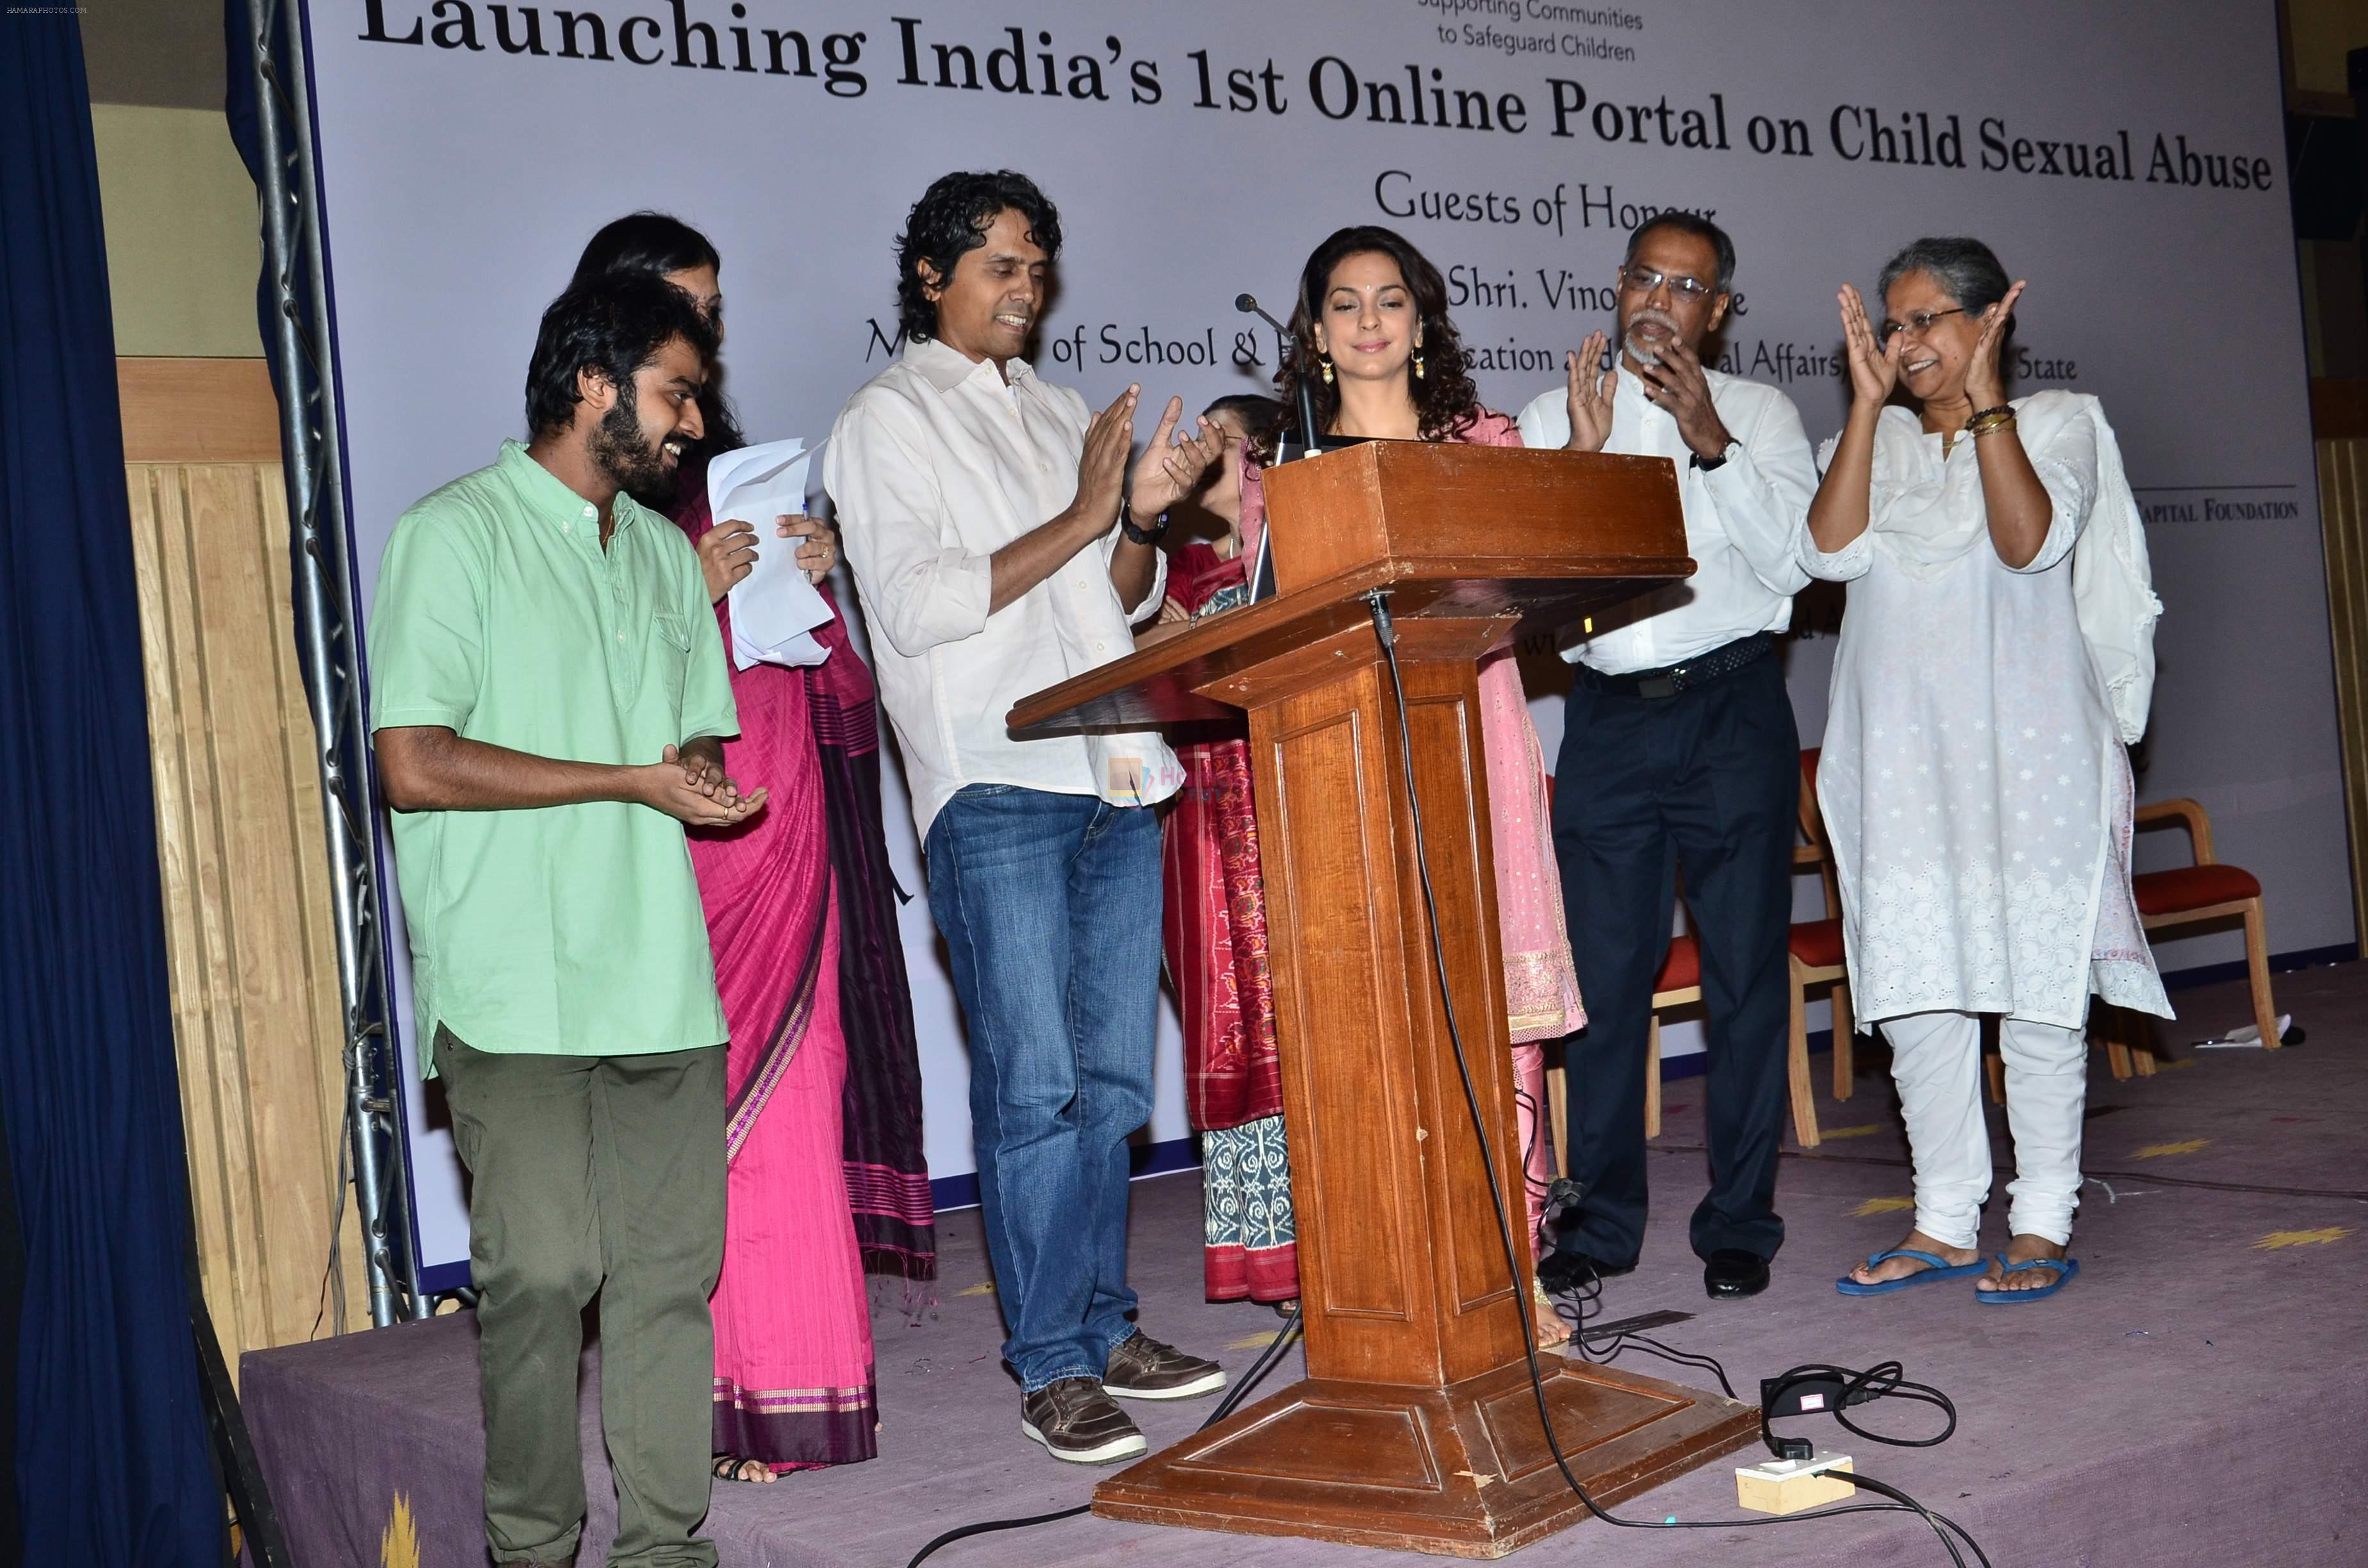 Juhi Chawla, Nagesh Kukunoor at the launch of India's first online portal on Child Sexual Abuse called www.aarambhindia.org on 18th Nov 2014